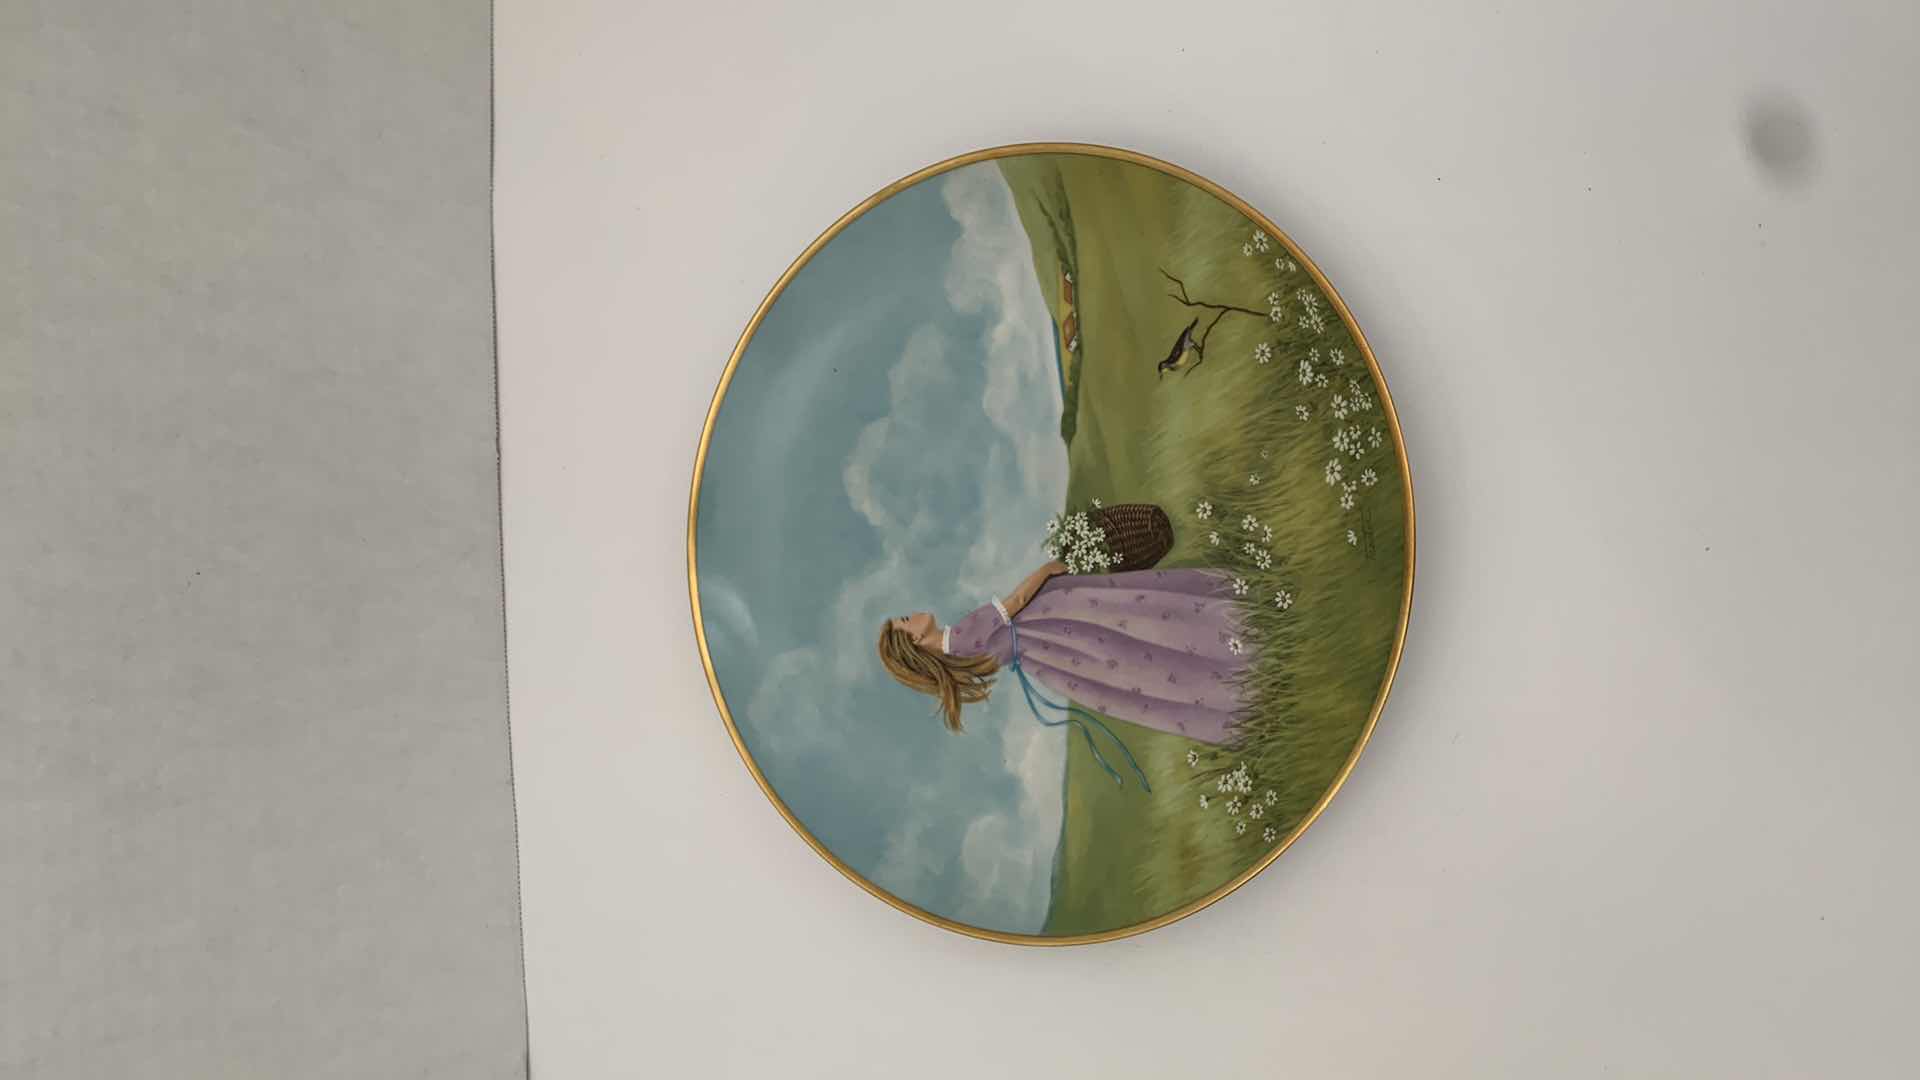 Photo 1 of LORRAINE TRESTER “A TIME FOR DREAMING” KAISER PLATE 10” WIDE